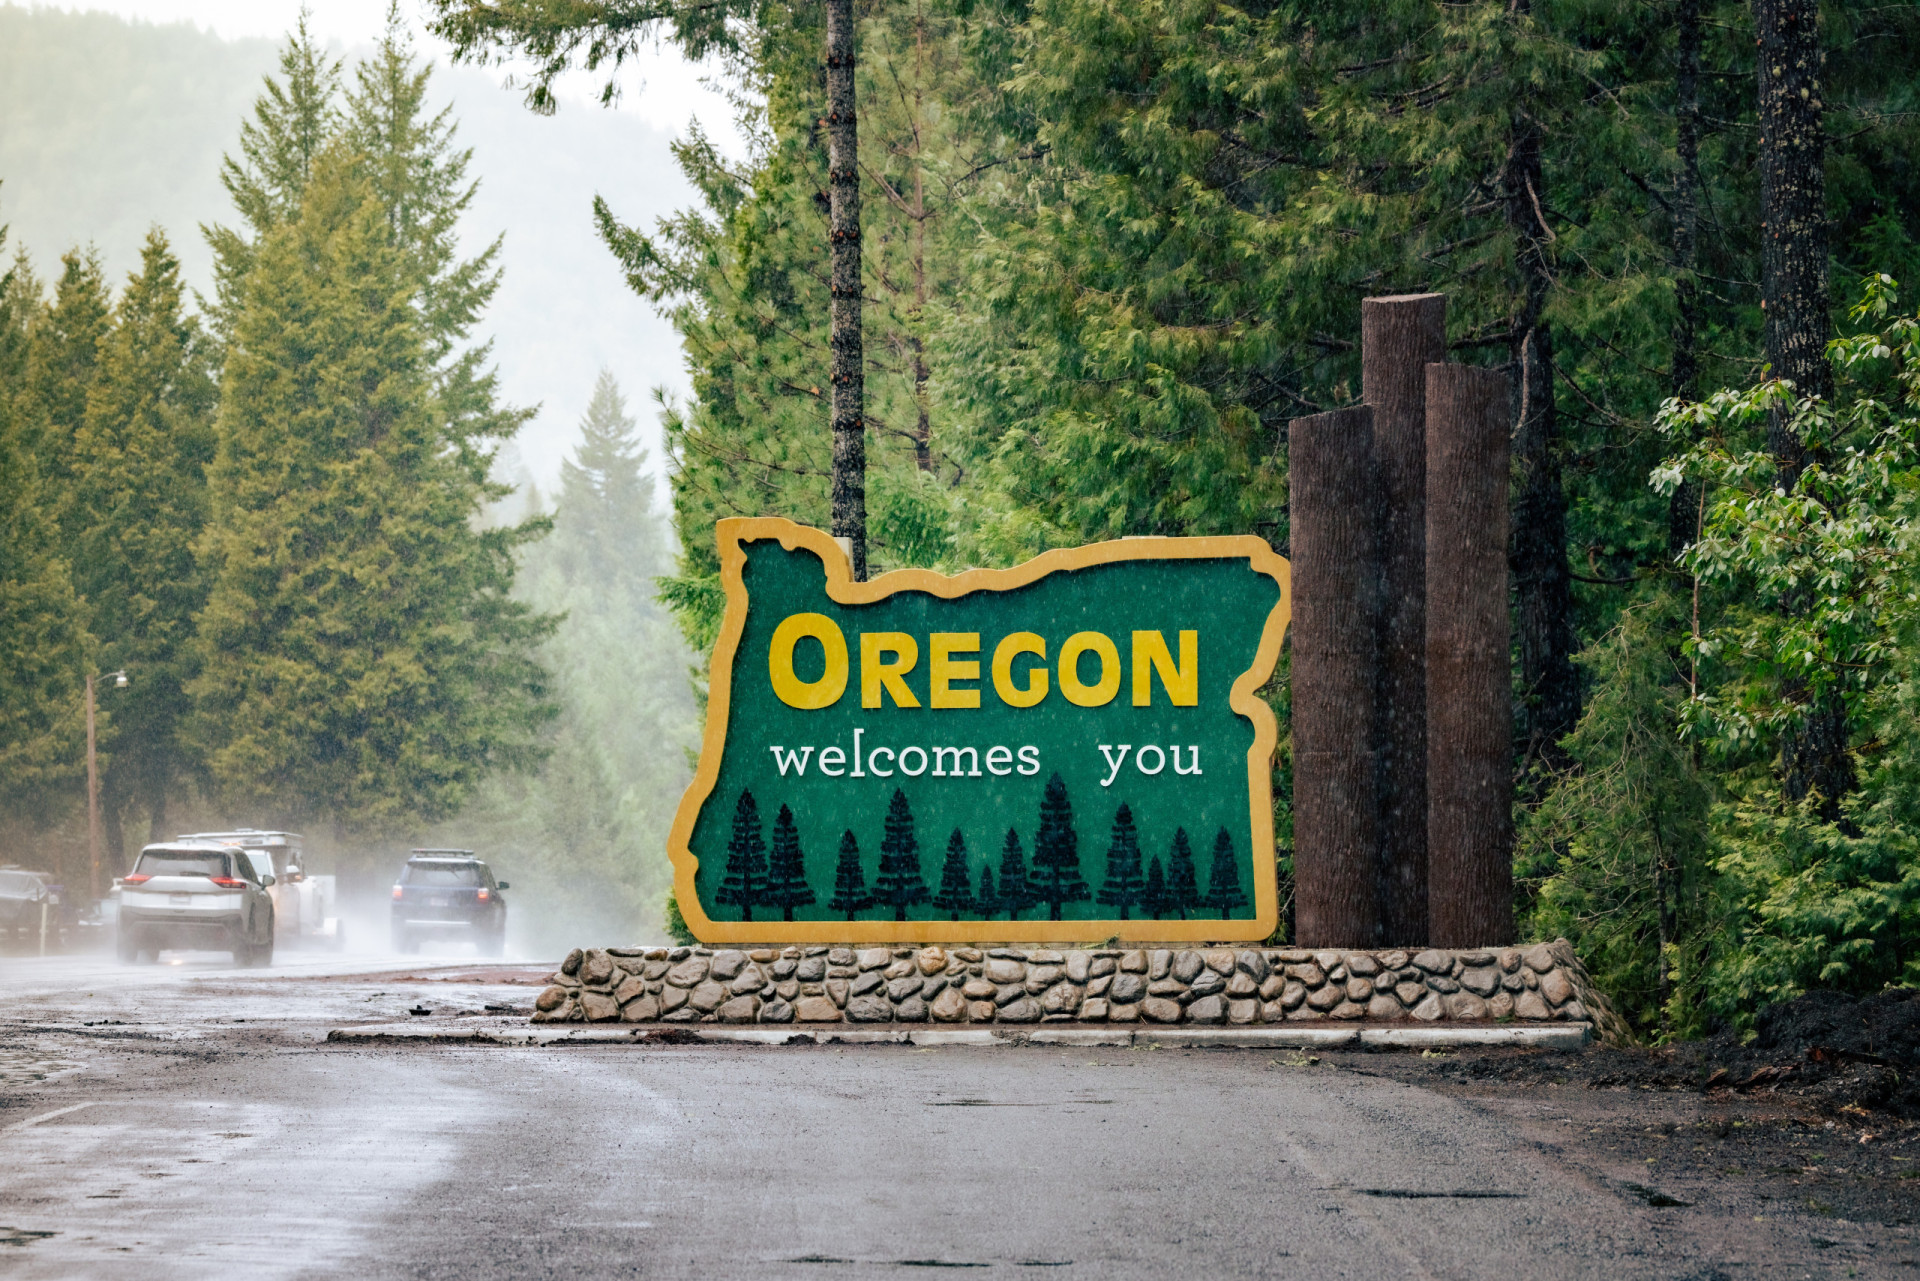 <p>This sign can be found on Interstate 5, when travelling from California to Oregon. It alludes to the state's lush forests.</p><p><a href="https://www.msn.com/en-us/community/channel/vid-7xx8mnucu55yw63we9va2gwr7uihbxwc68fxqp25x6tg4ftibpra?cvid=94631541bc0f4f89bfd59158d696ad7e">Follow us and access great exclusive content every day</a></p>